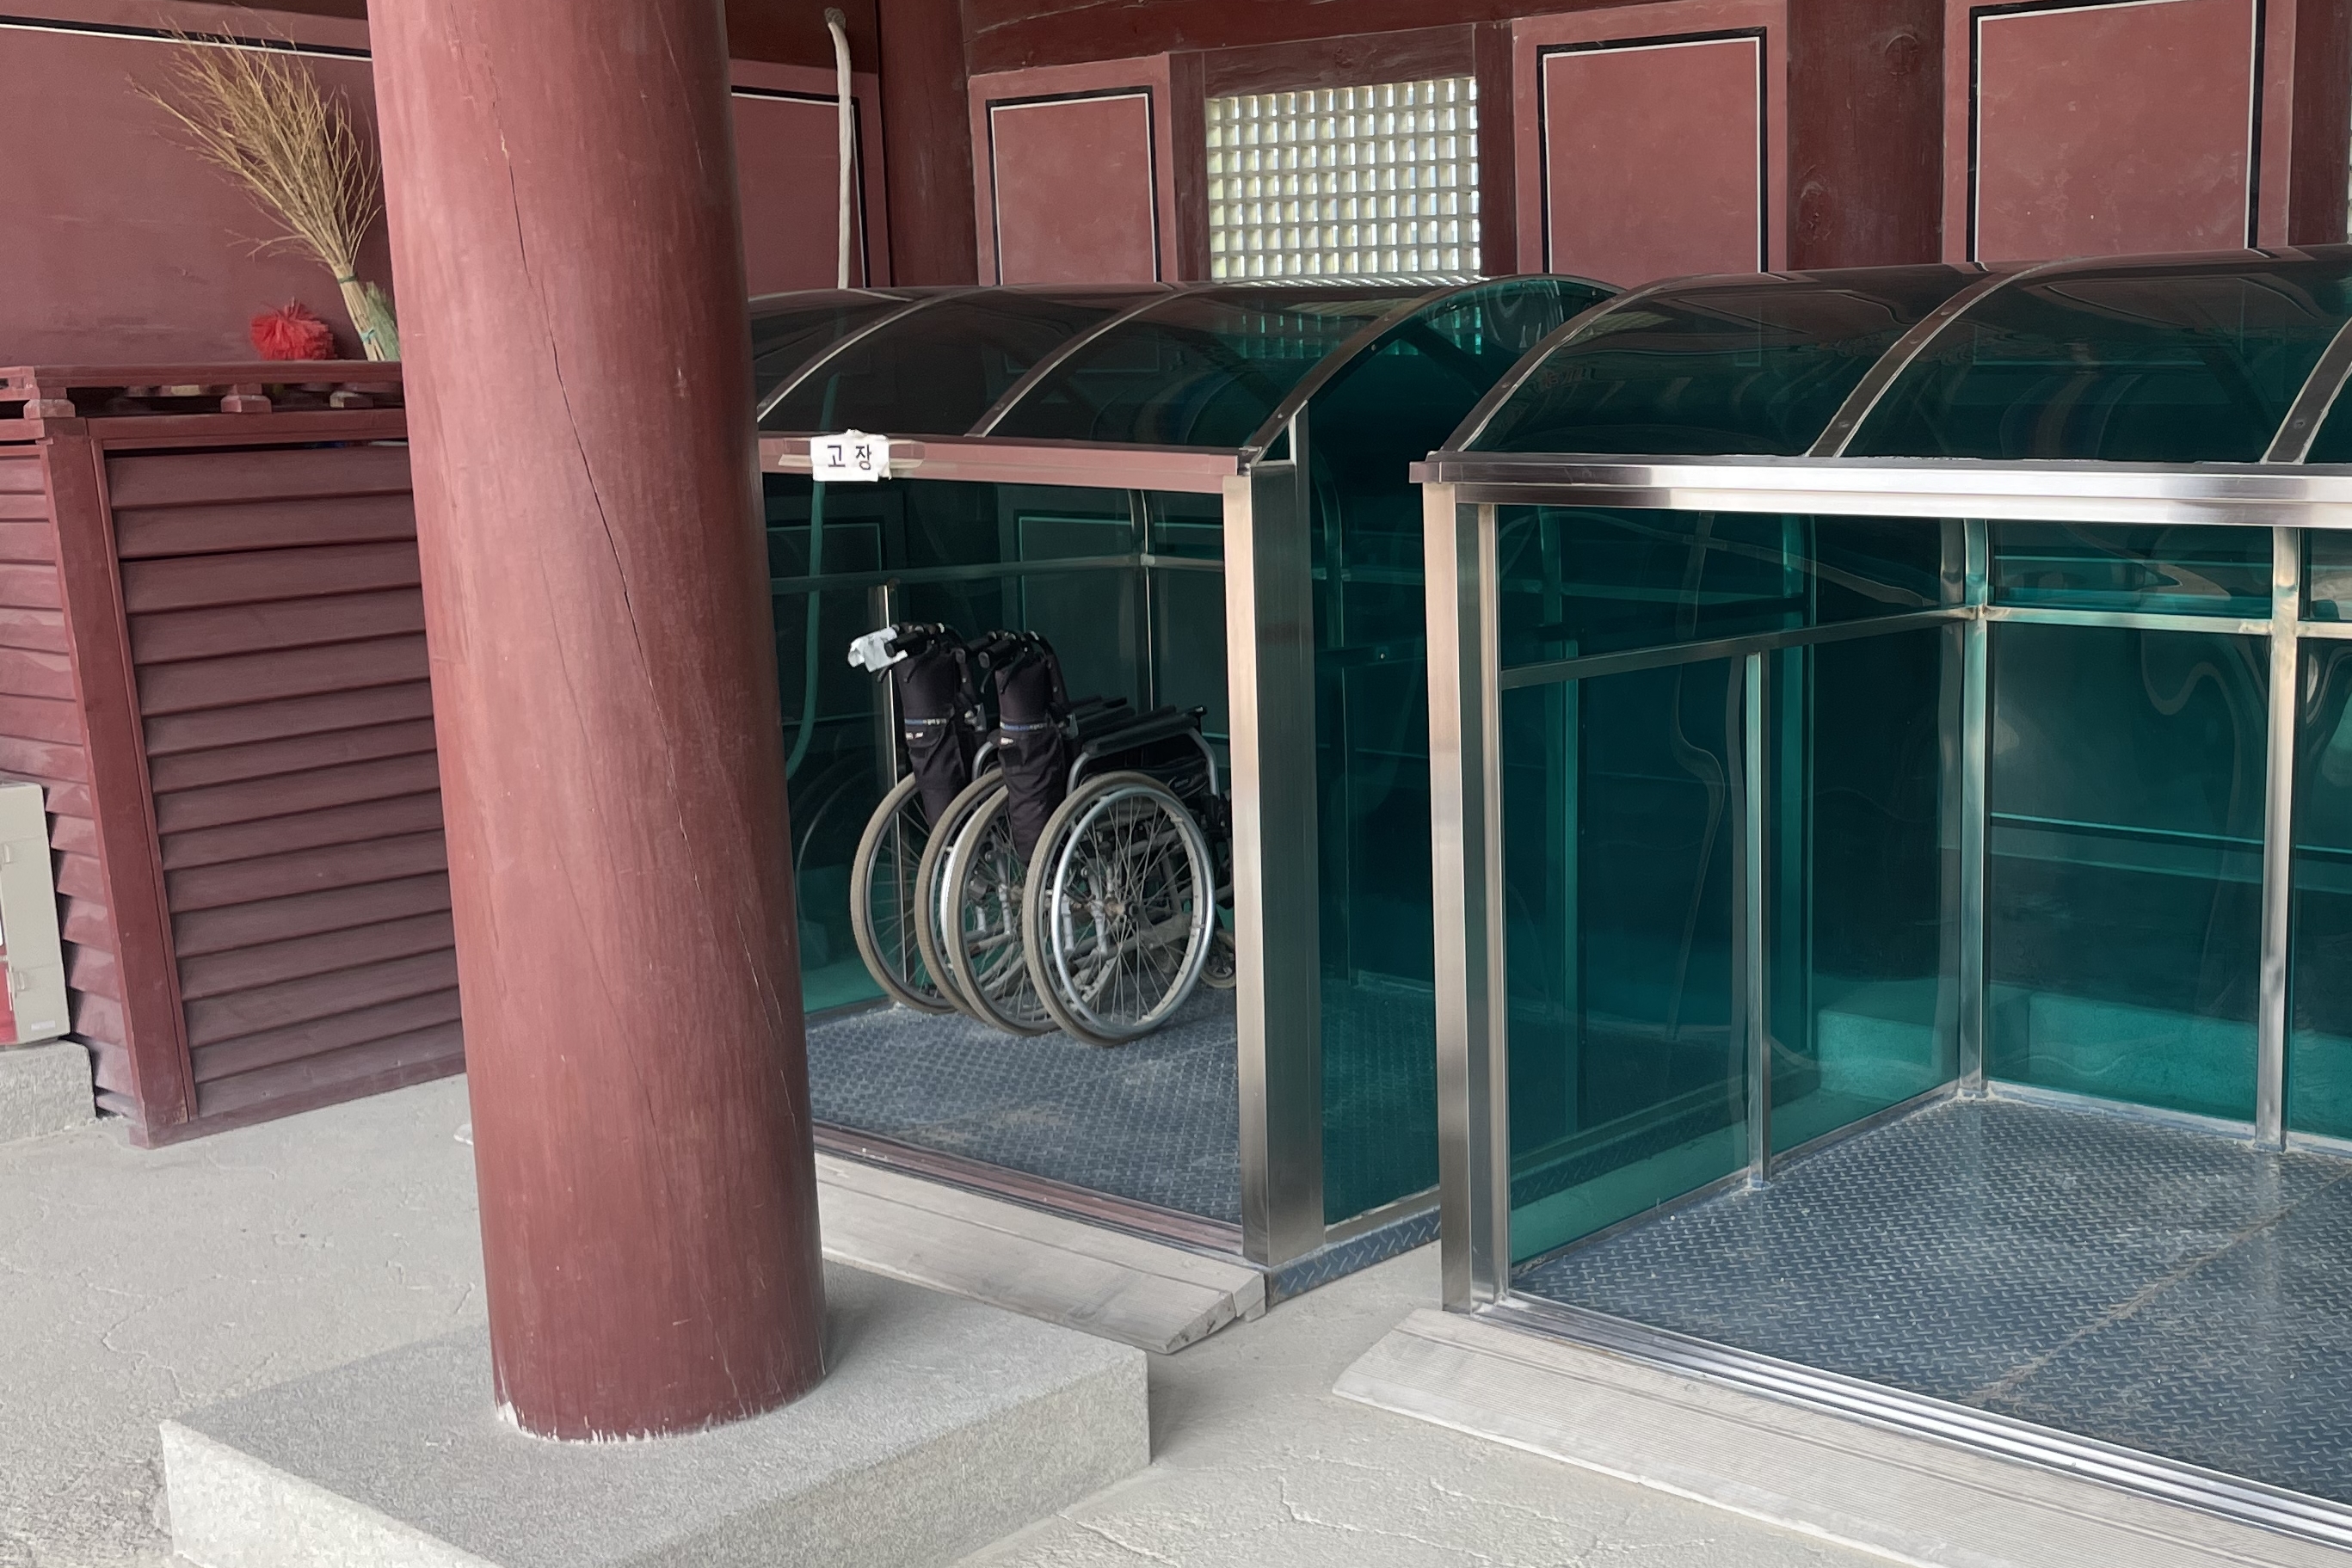 Information board/ Information center0 : Two foldable wheelchairs neatly arranged in a storage with cover
